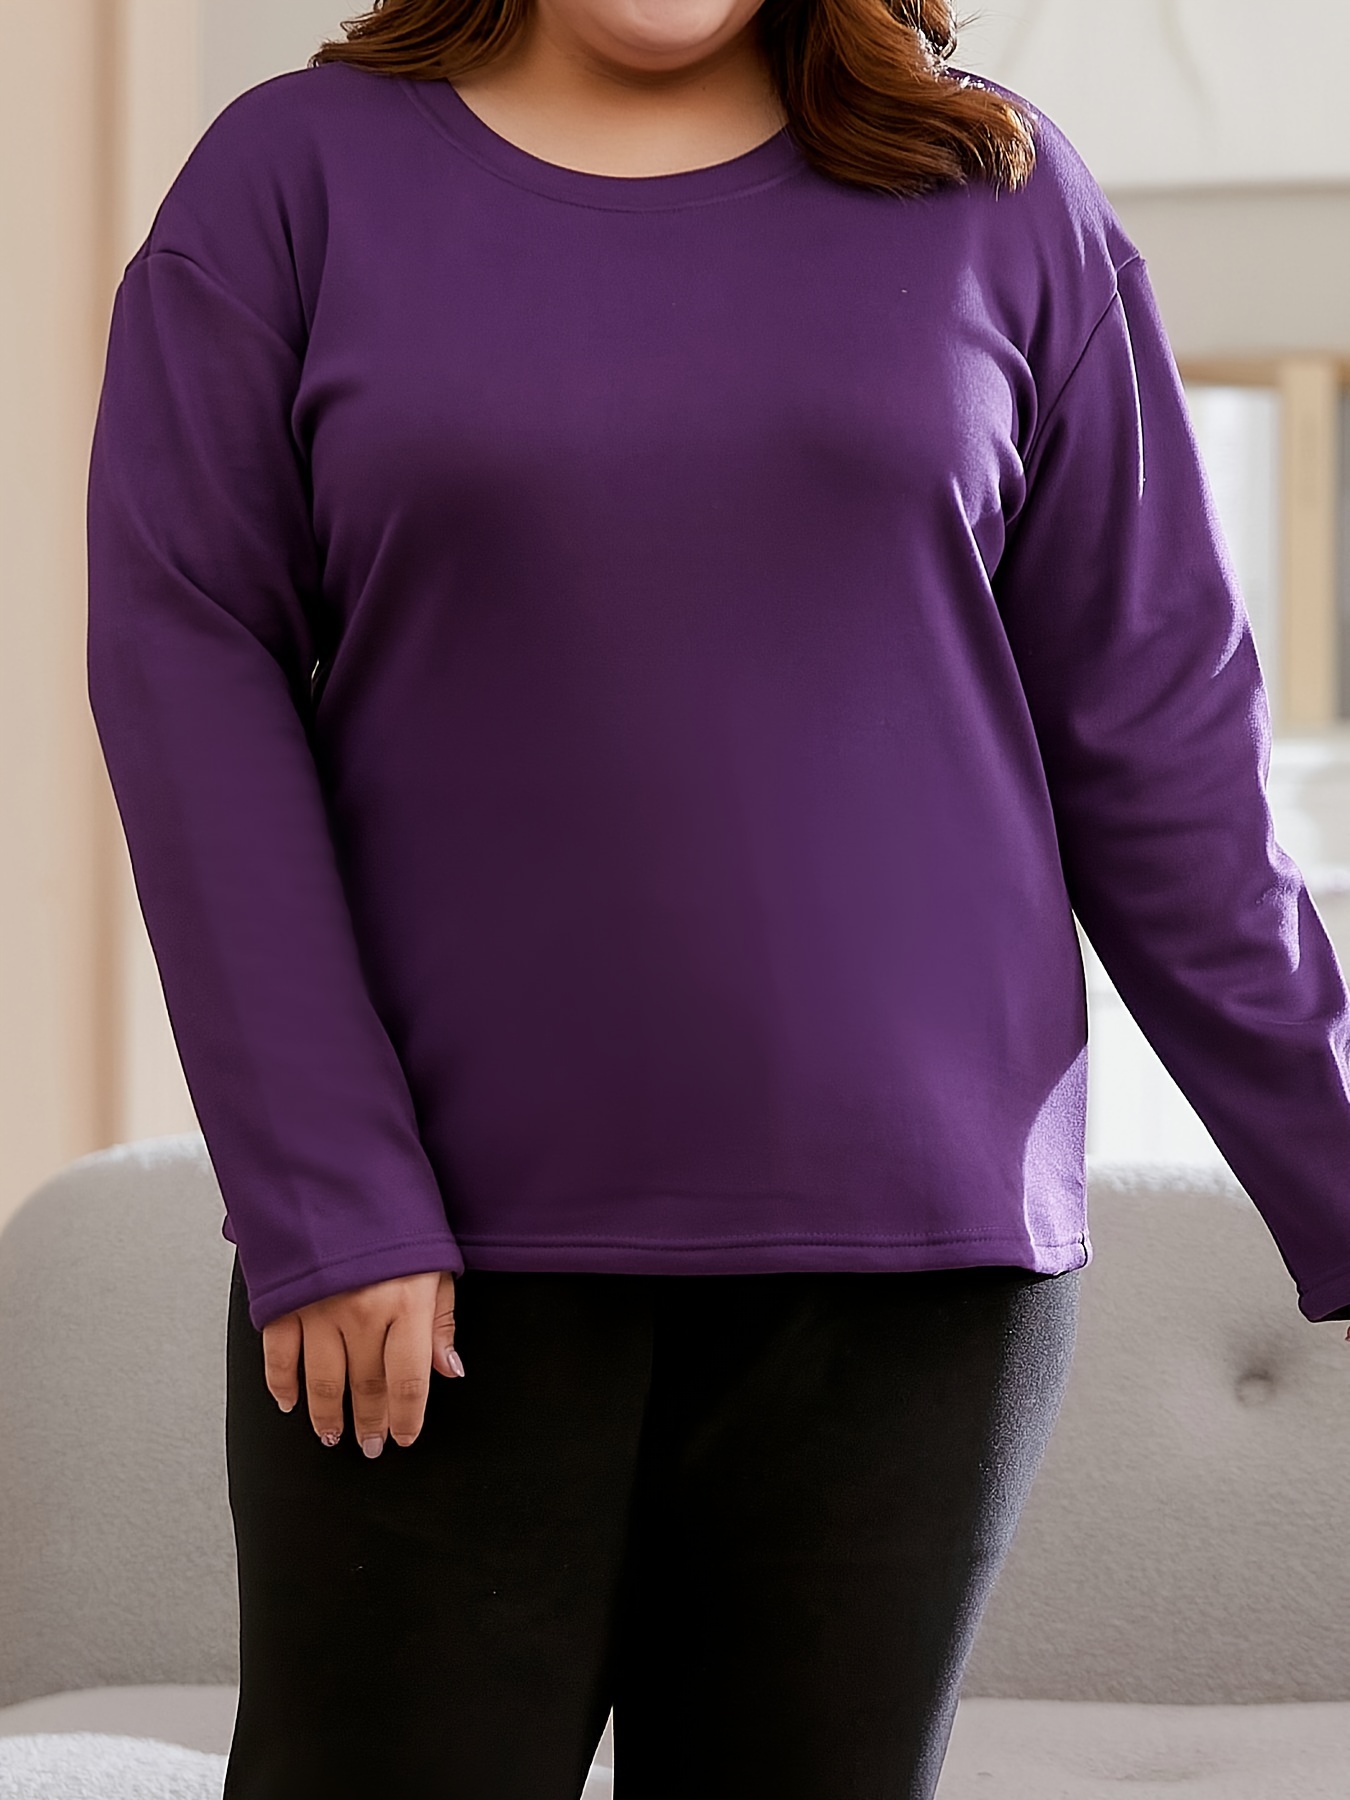 Womens Plus Size Baselayers & Thermal Clothing